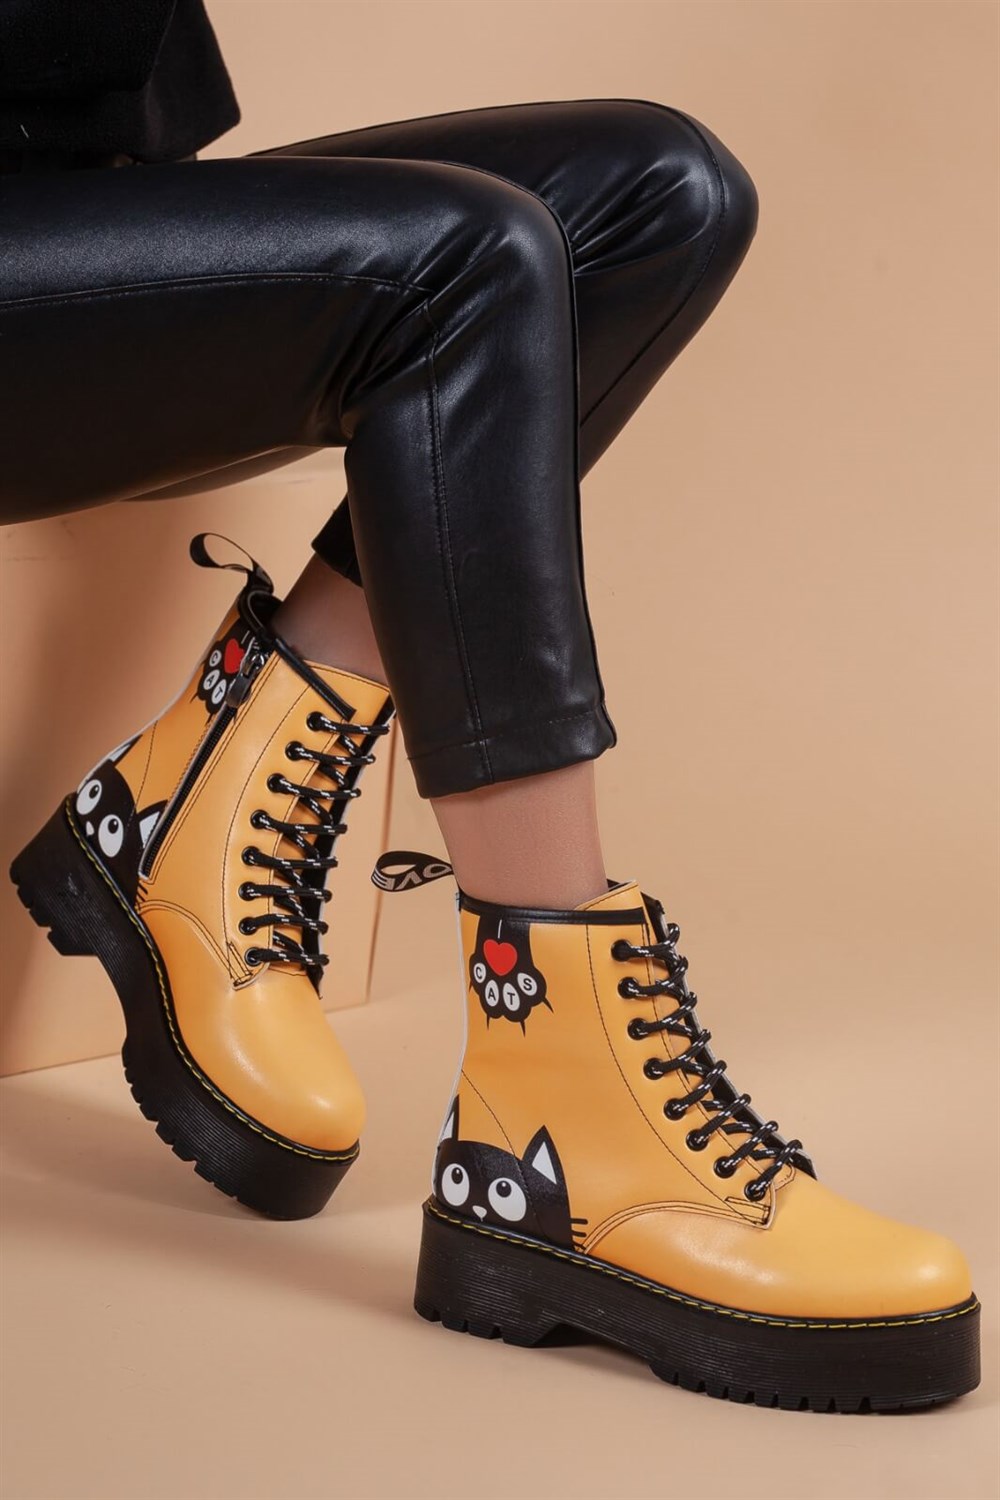 CAT THEMED LADY WOMEN'S POSTAL BOOTS